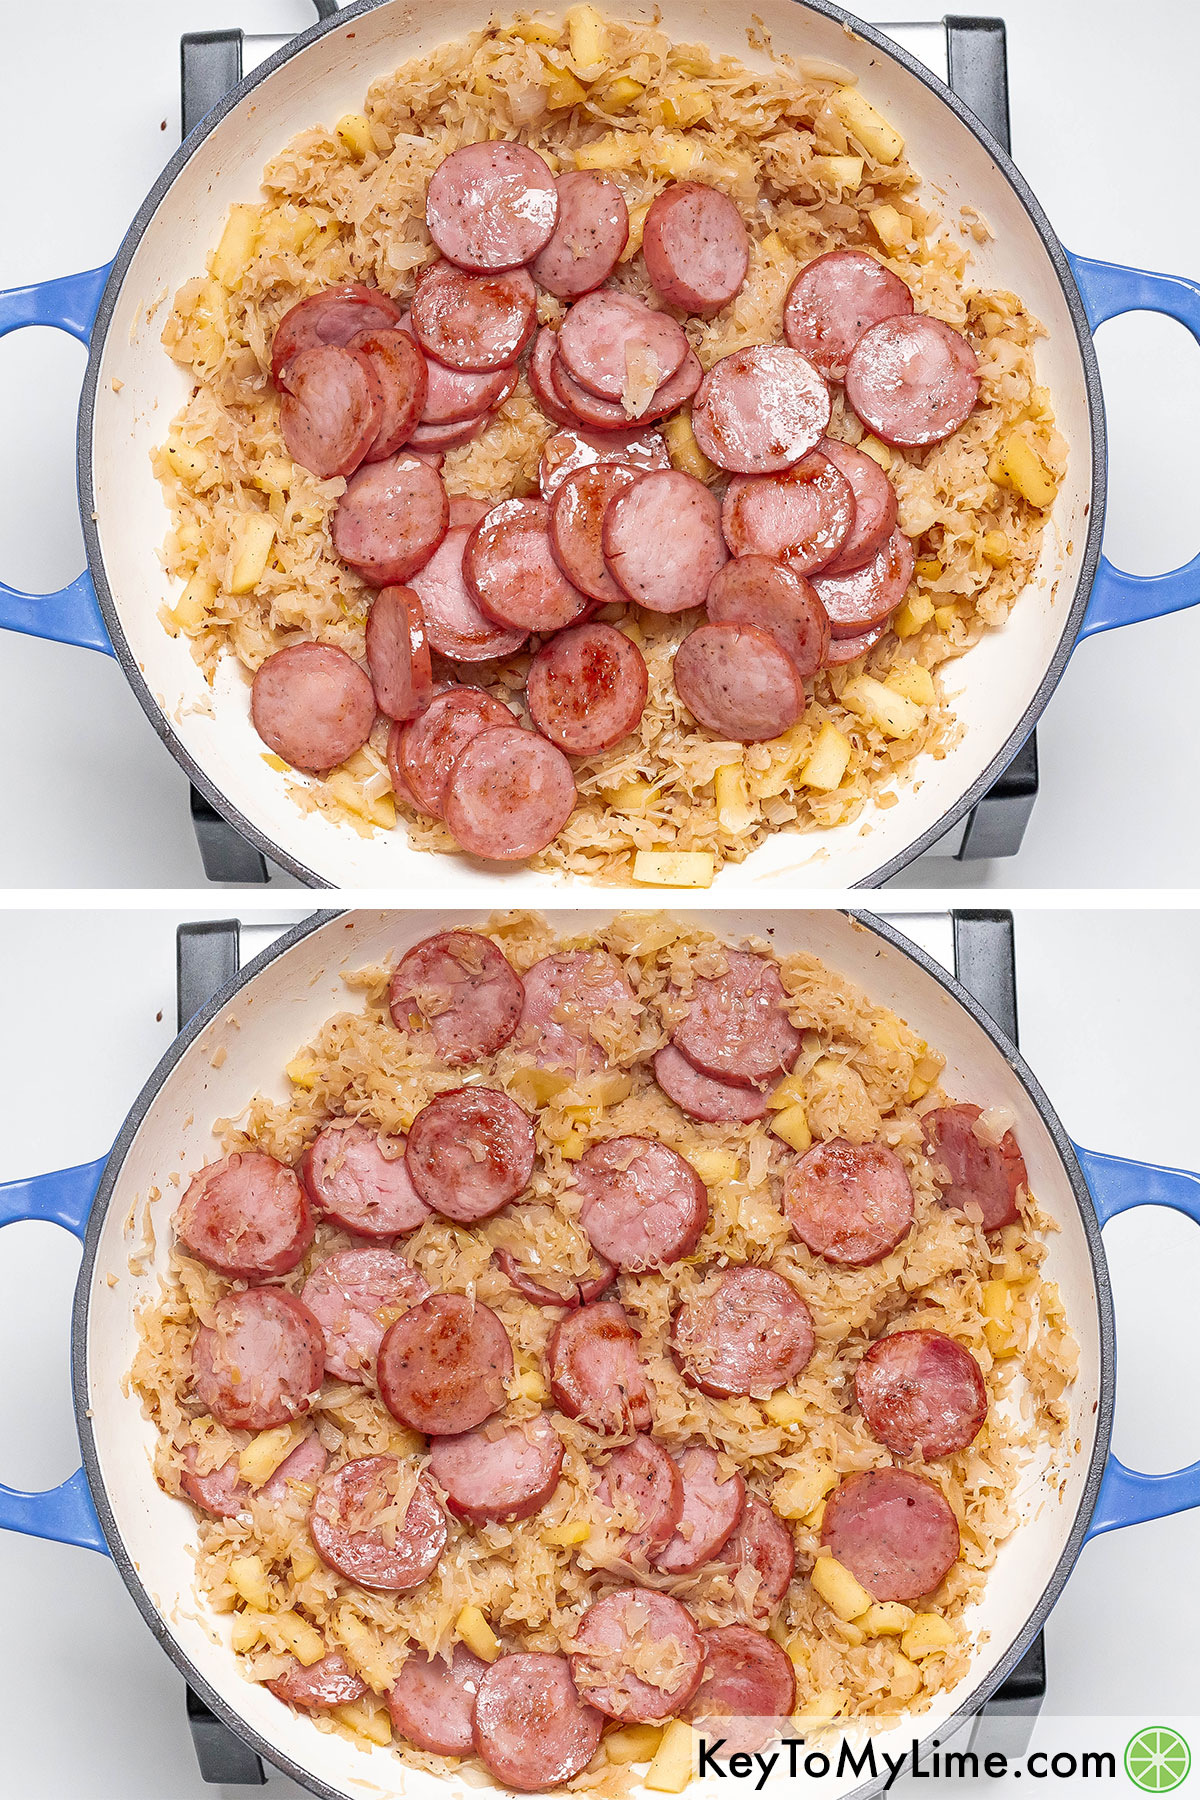 Adding browned kielbasa rounds to the skillet with sauerkraut, and then mixing together.